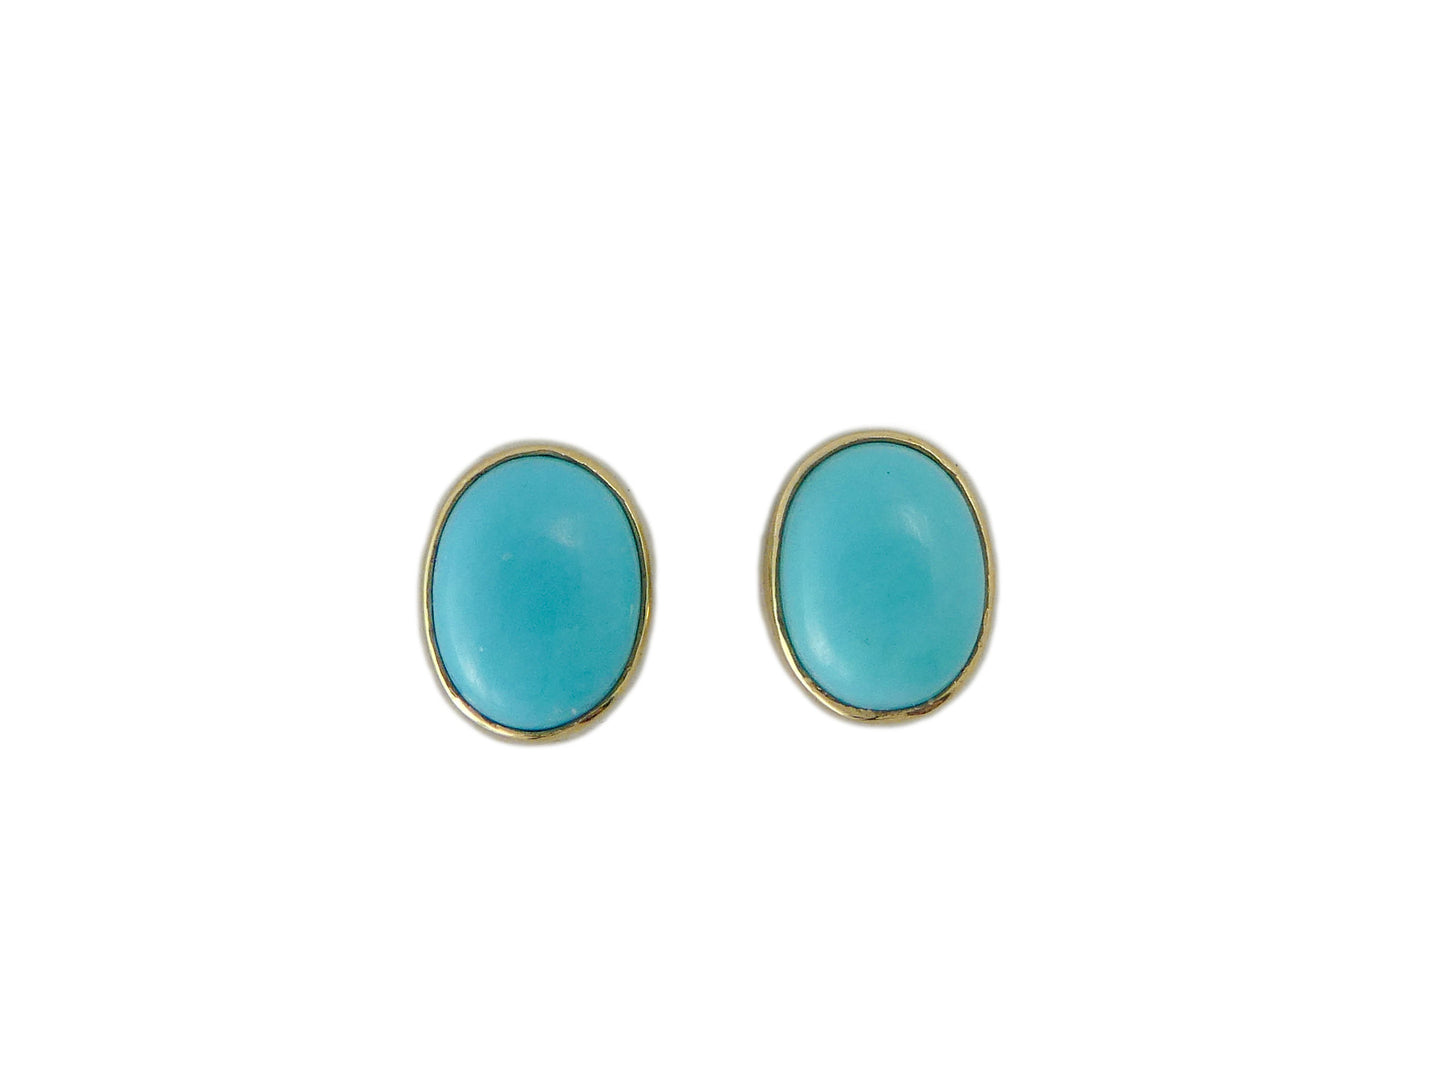 Oval Turquoise 14k Yellow Gold Bezel Studs, 8x6mm oval cabochon earrings